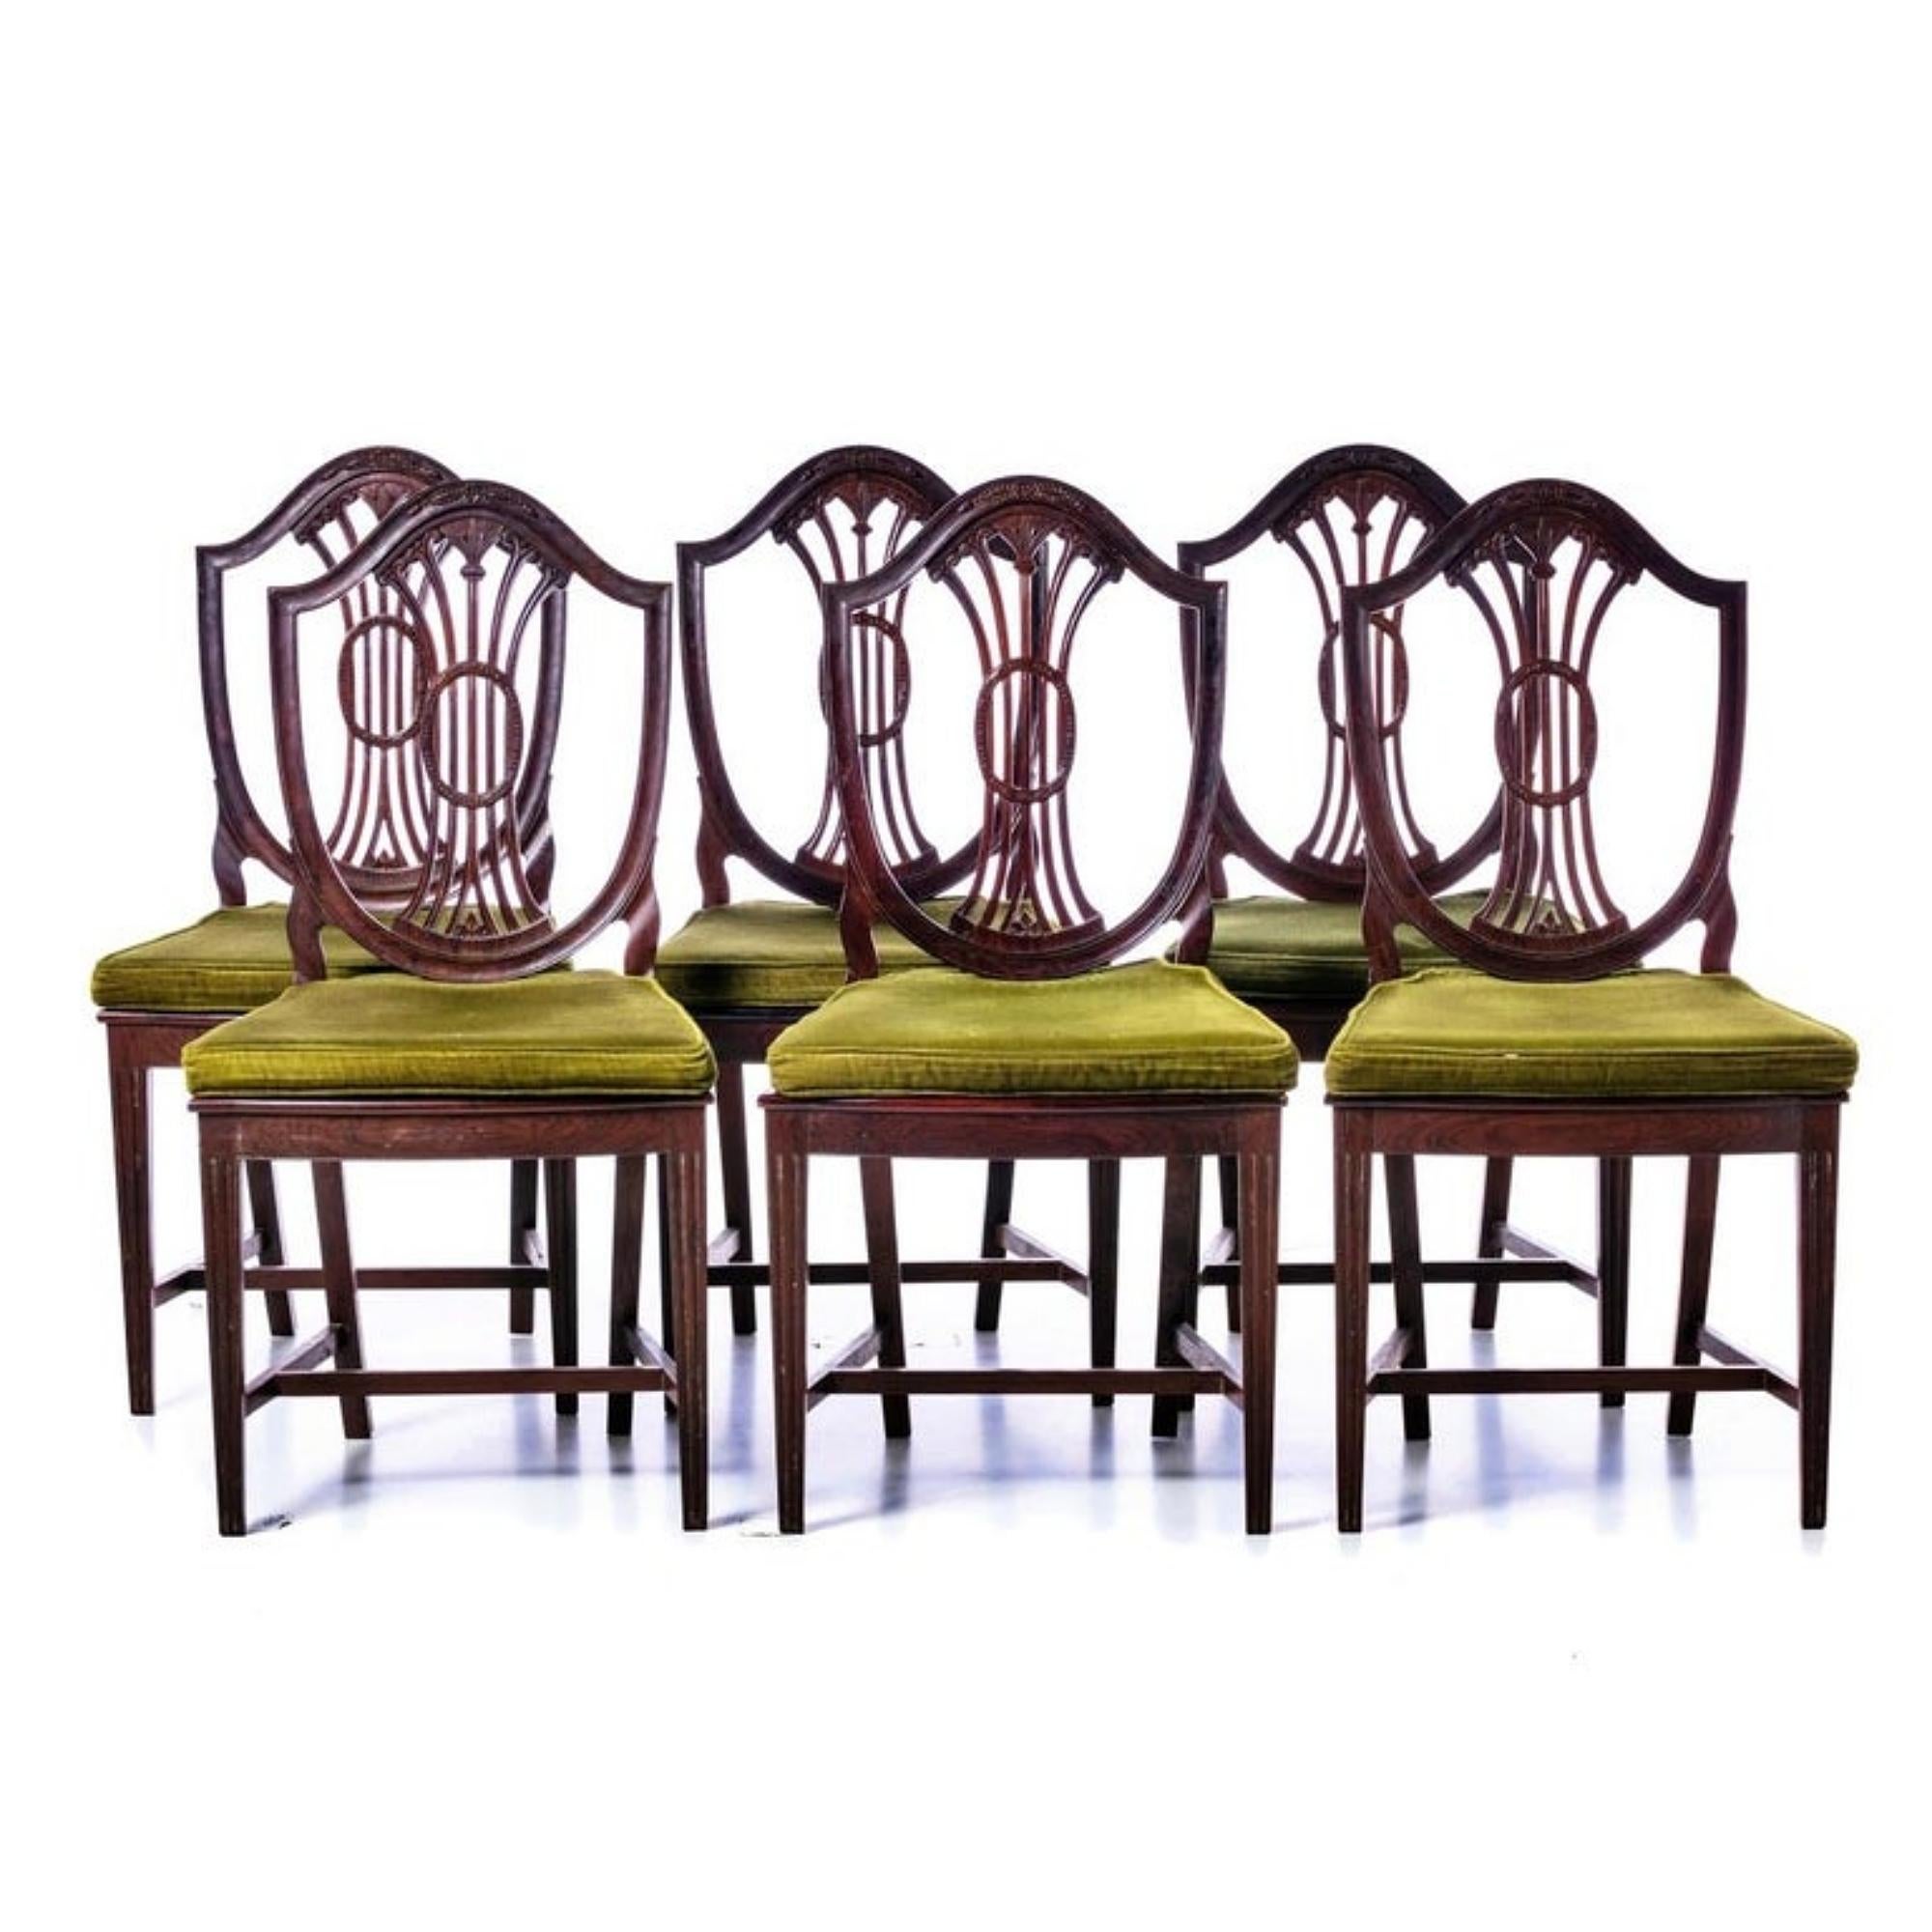 Baroque Lot of 6 Chairs Portuguese 19th Century in Brazilian Rosewood